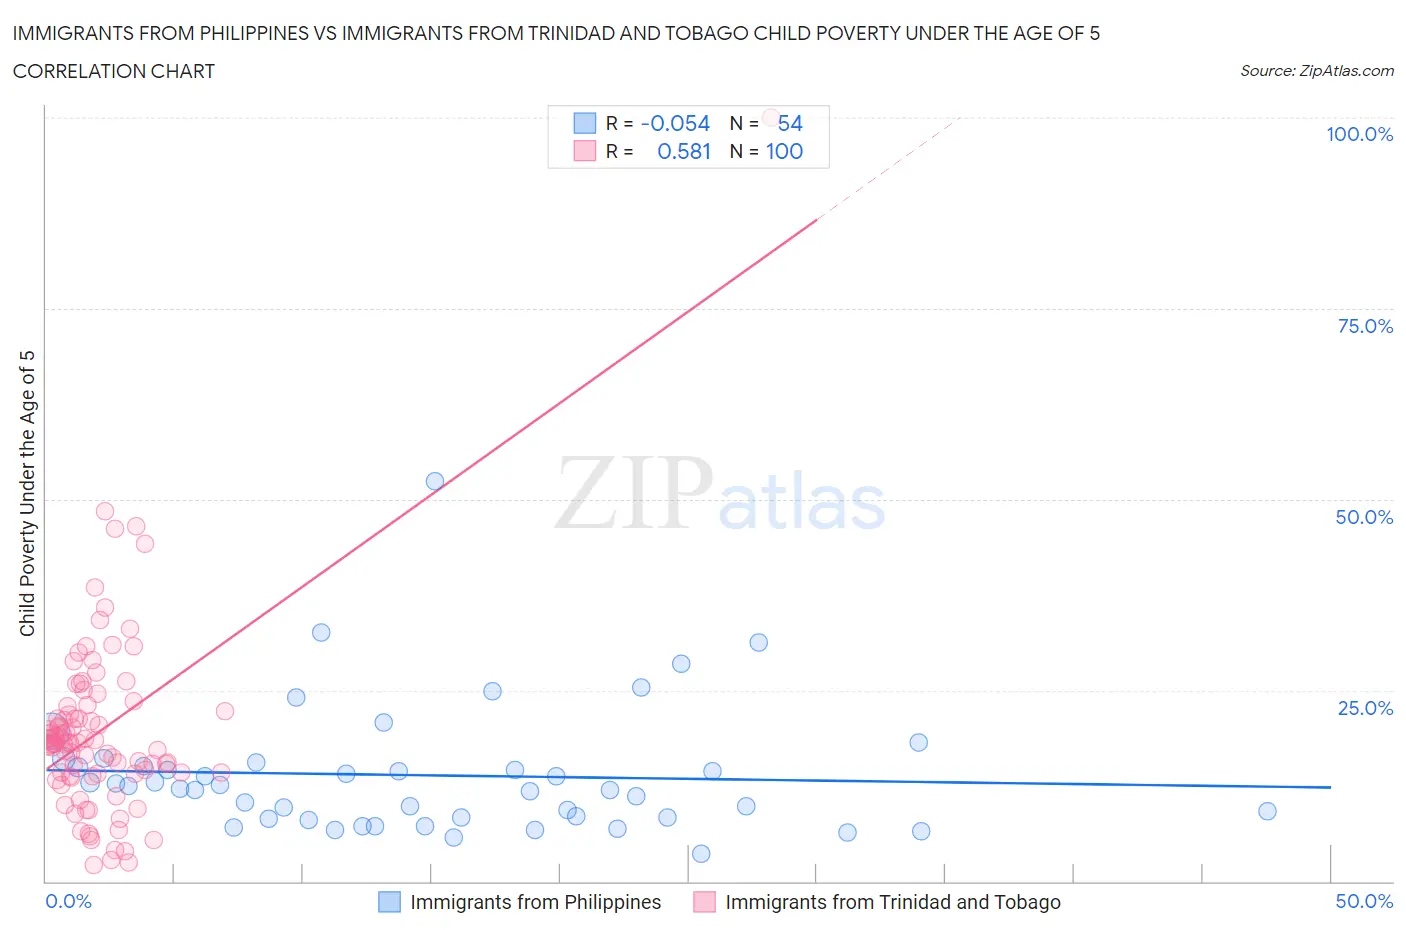 Immigrants from Philippines vs Immigrants from Trinidad and Tobago Child Poverty Under the Age of 5